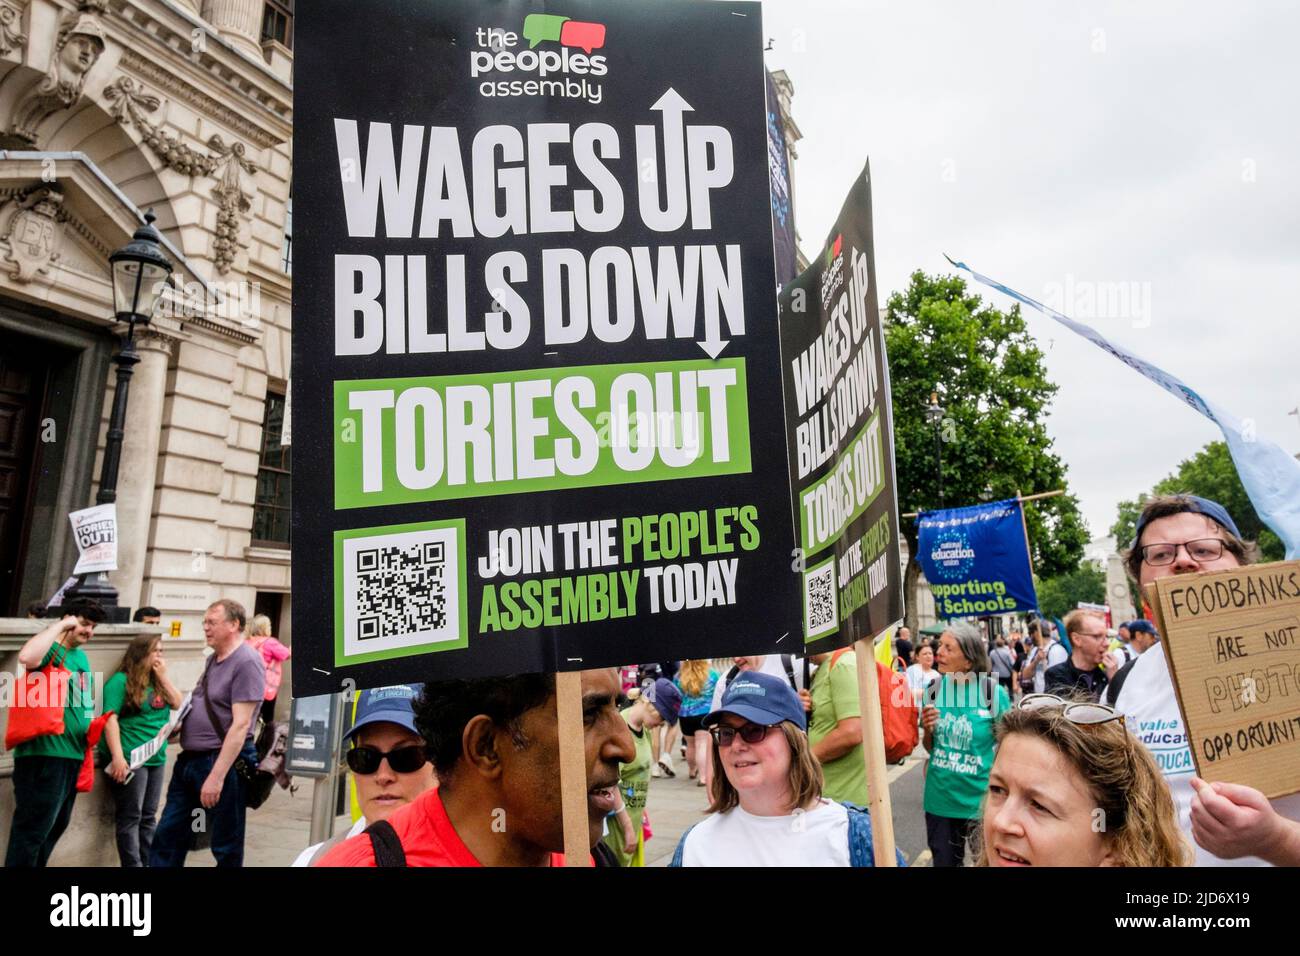 London UK, 18th June 2022. Thousands of trade union members march on the We Demand Better protest organised by the TUC against the UK government. Placards call for a rise in workers' wages and reduction in household bills. Stock Photo